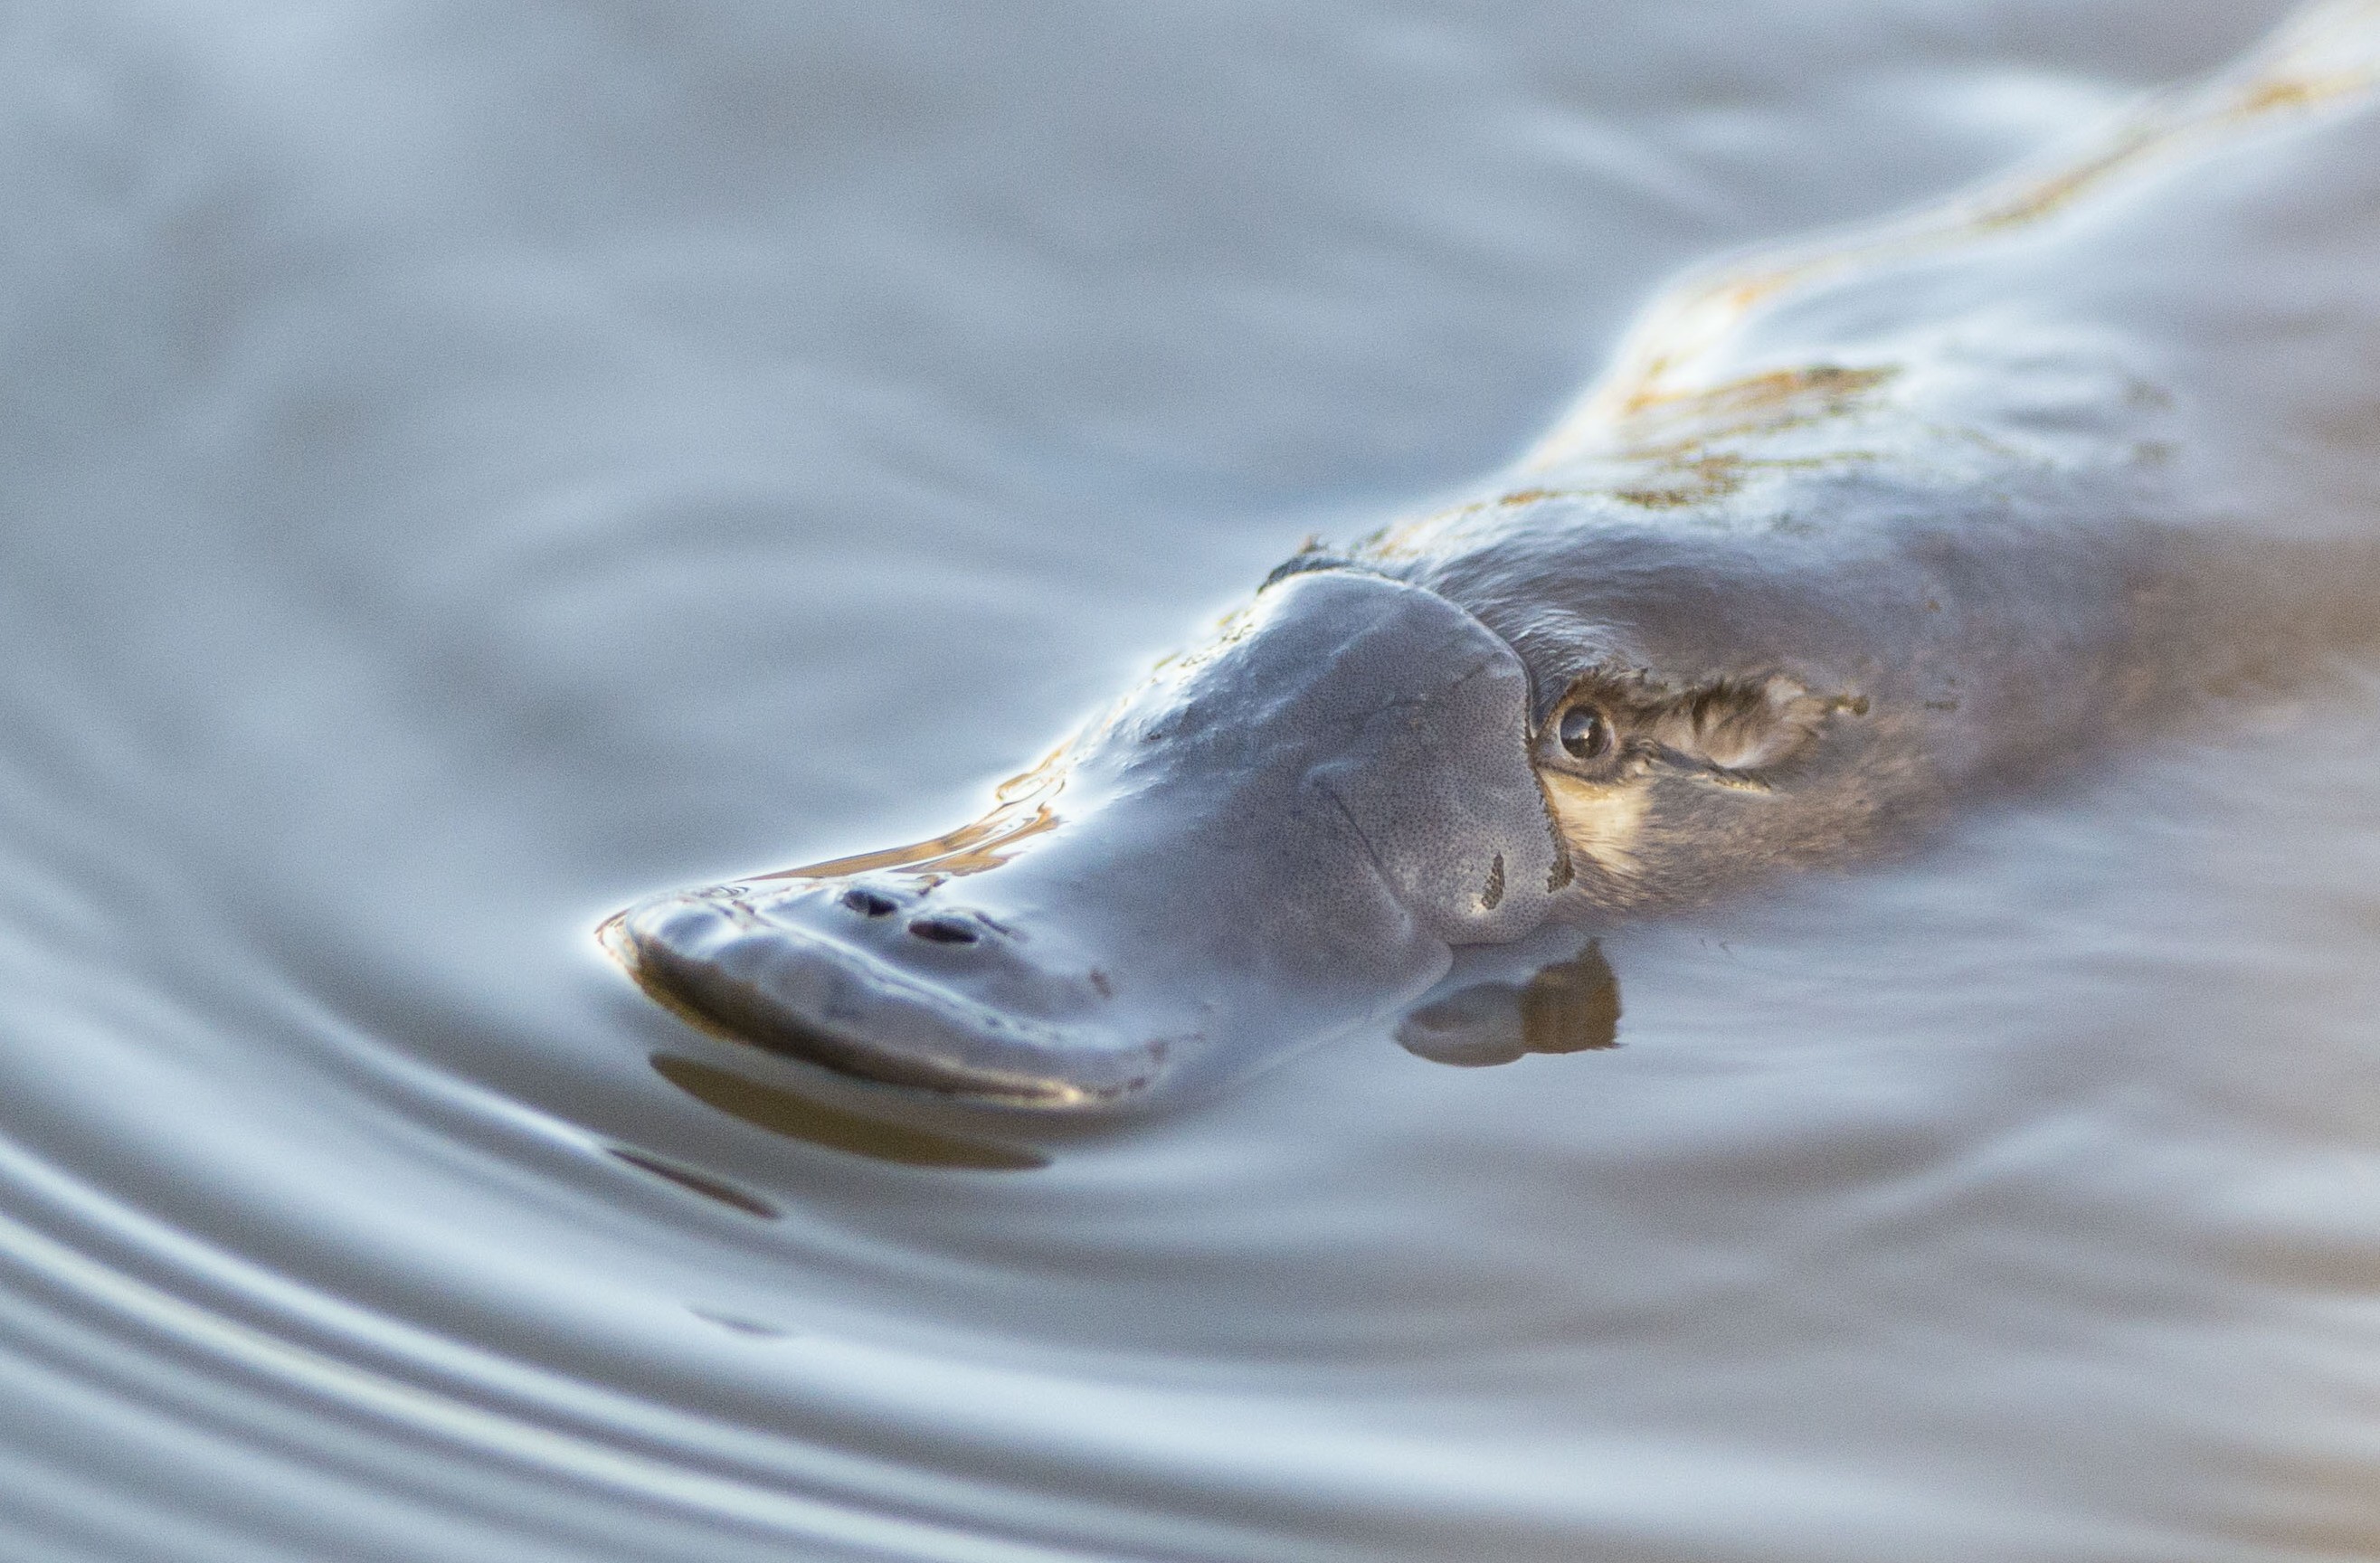 Citizen science to get more involved in the lives of local platypus